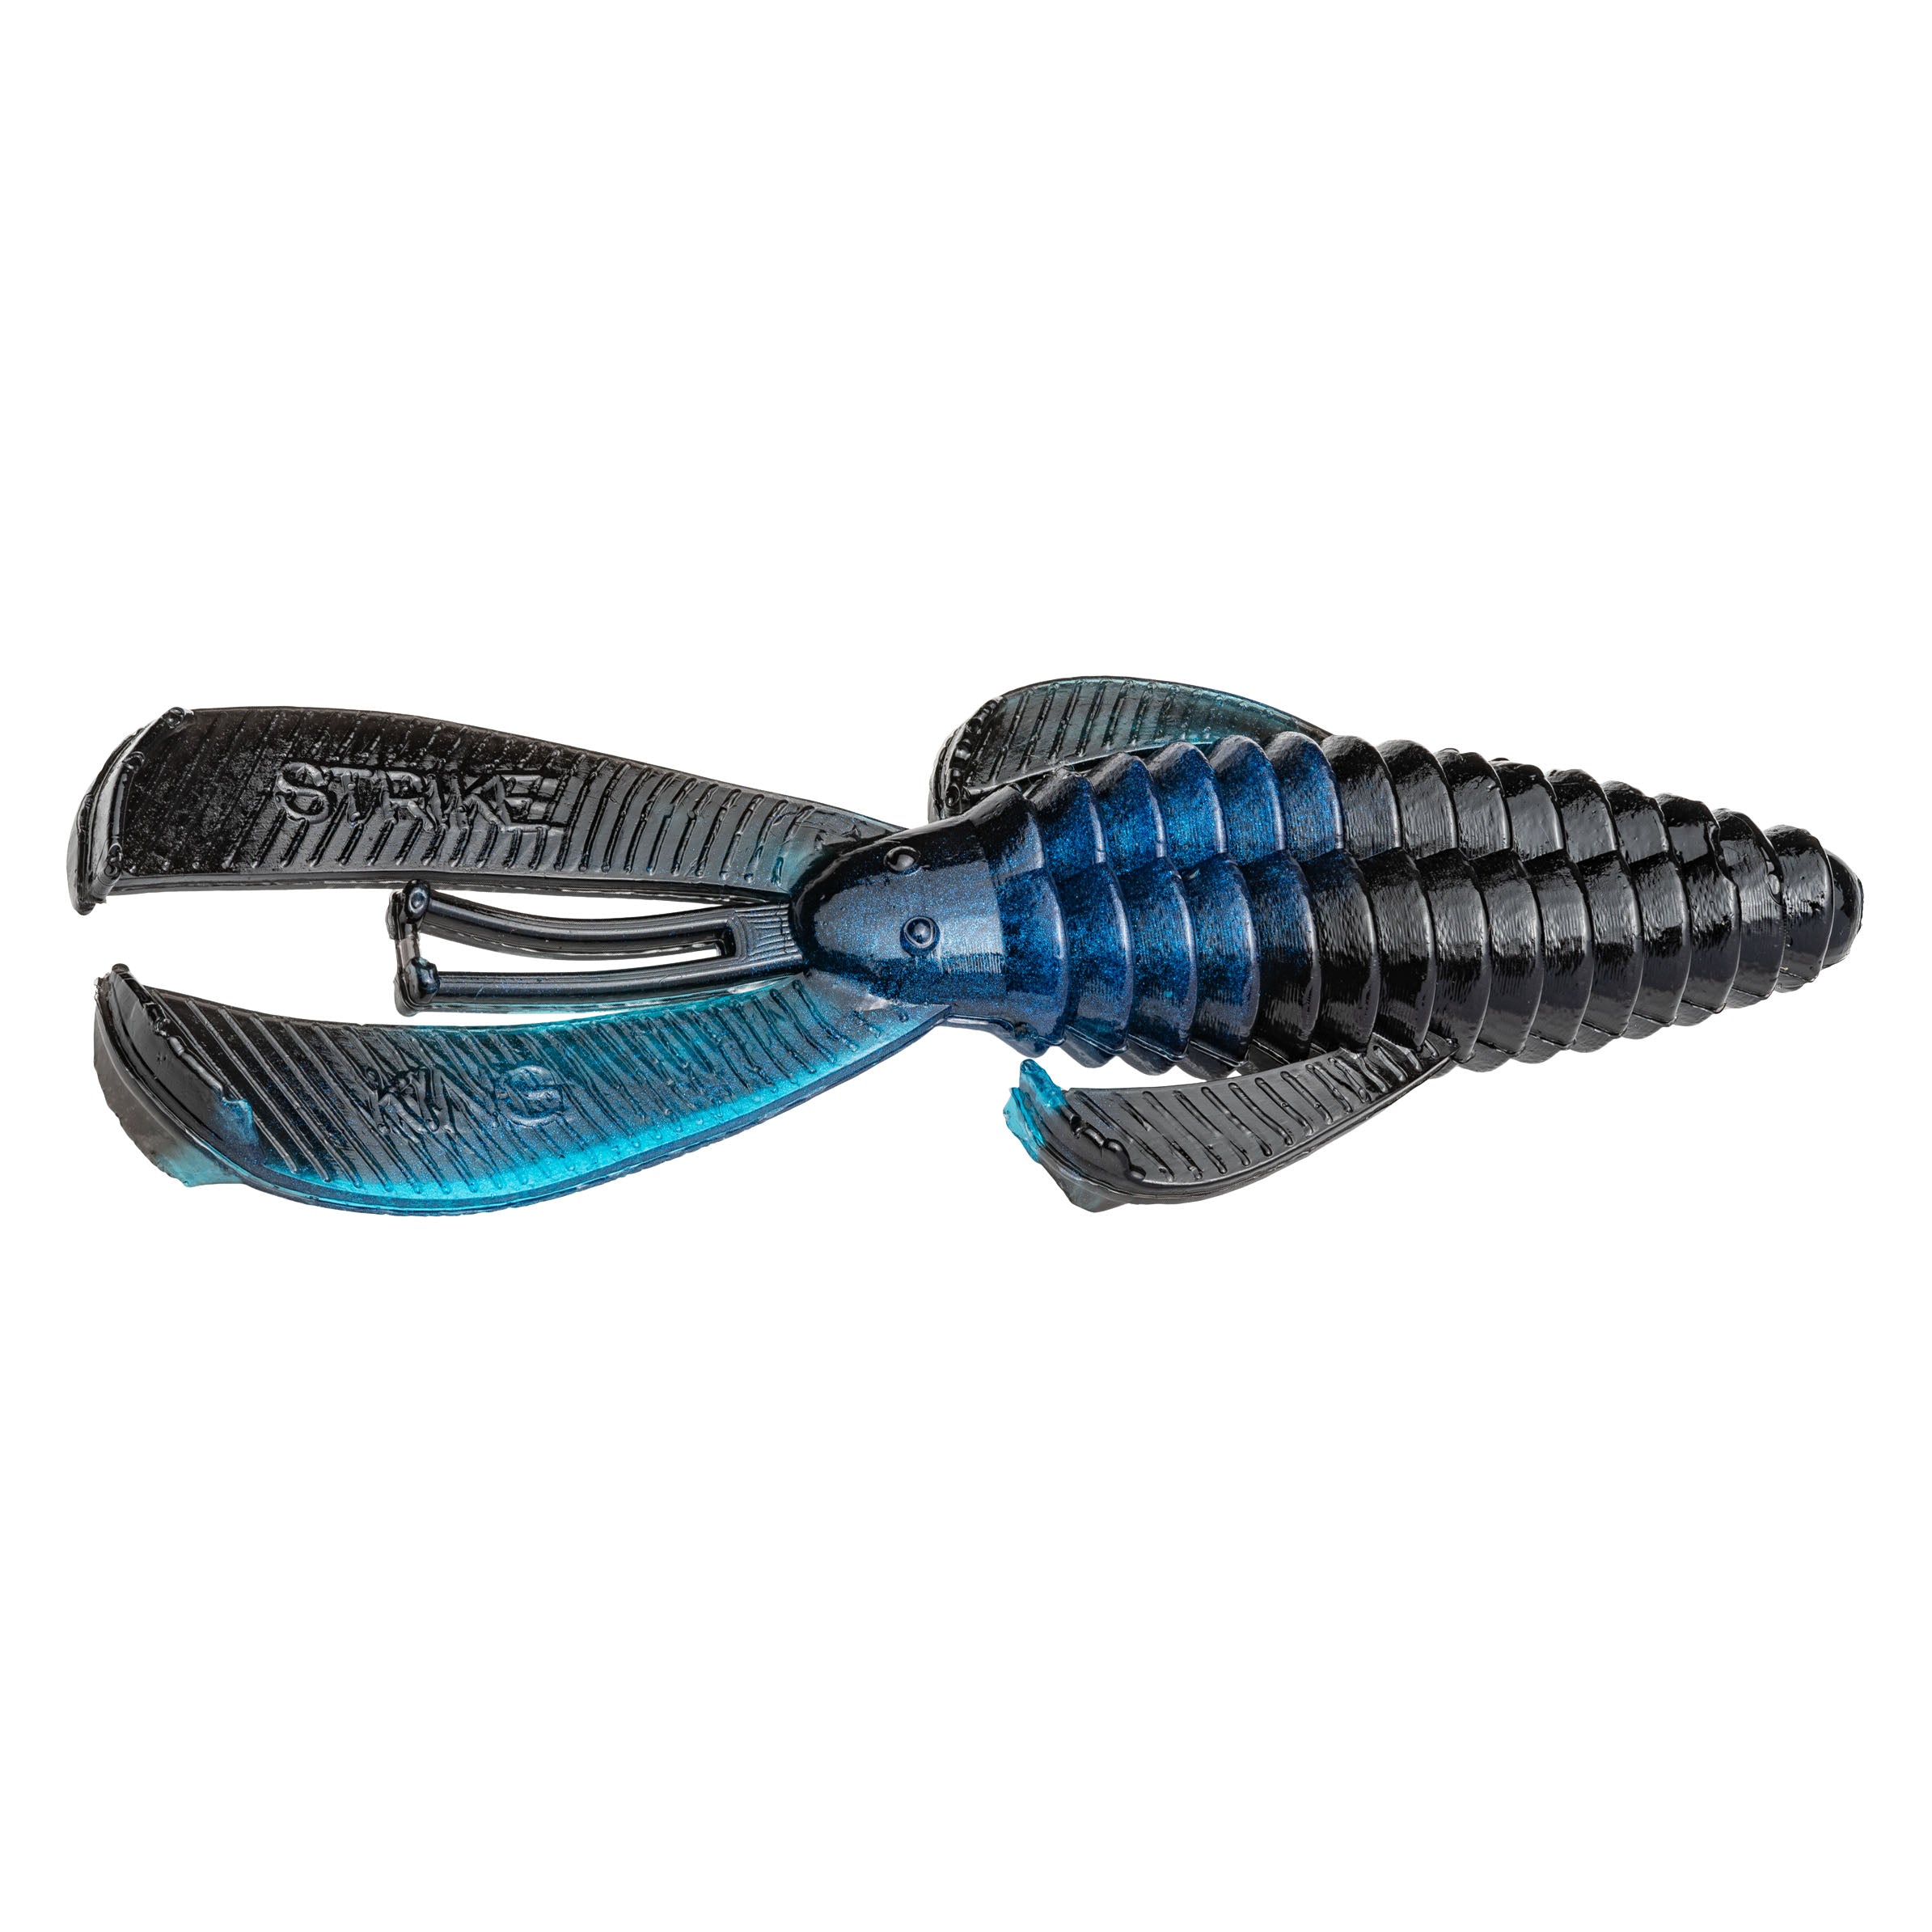 Strike King Rage Bug Soft Plastic Magnum Product Review